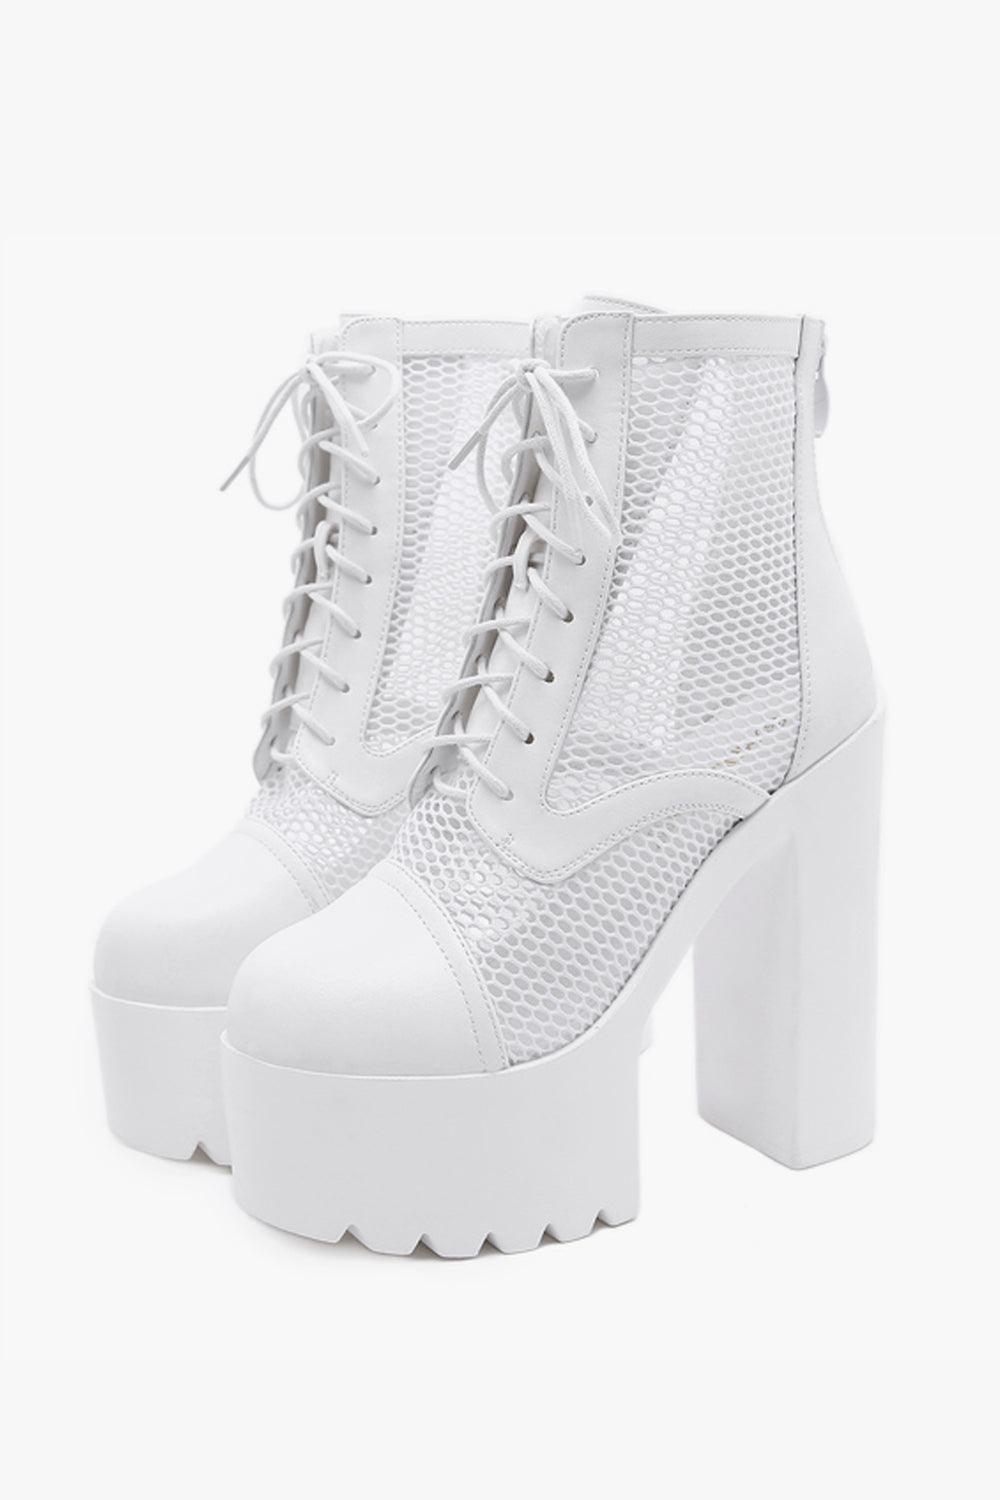 Mesh Laced Platform Shoes Grunge Aesthetic - Aesthetic Clothes Shop